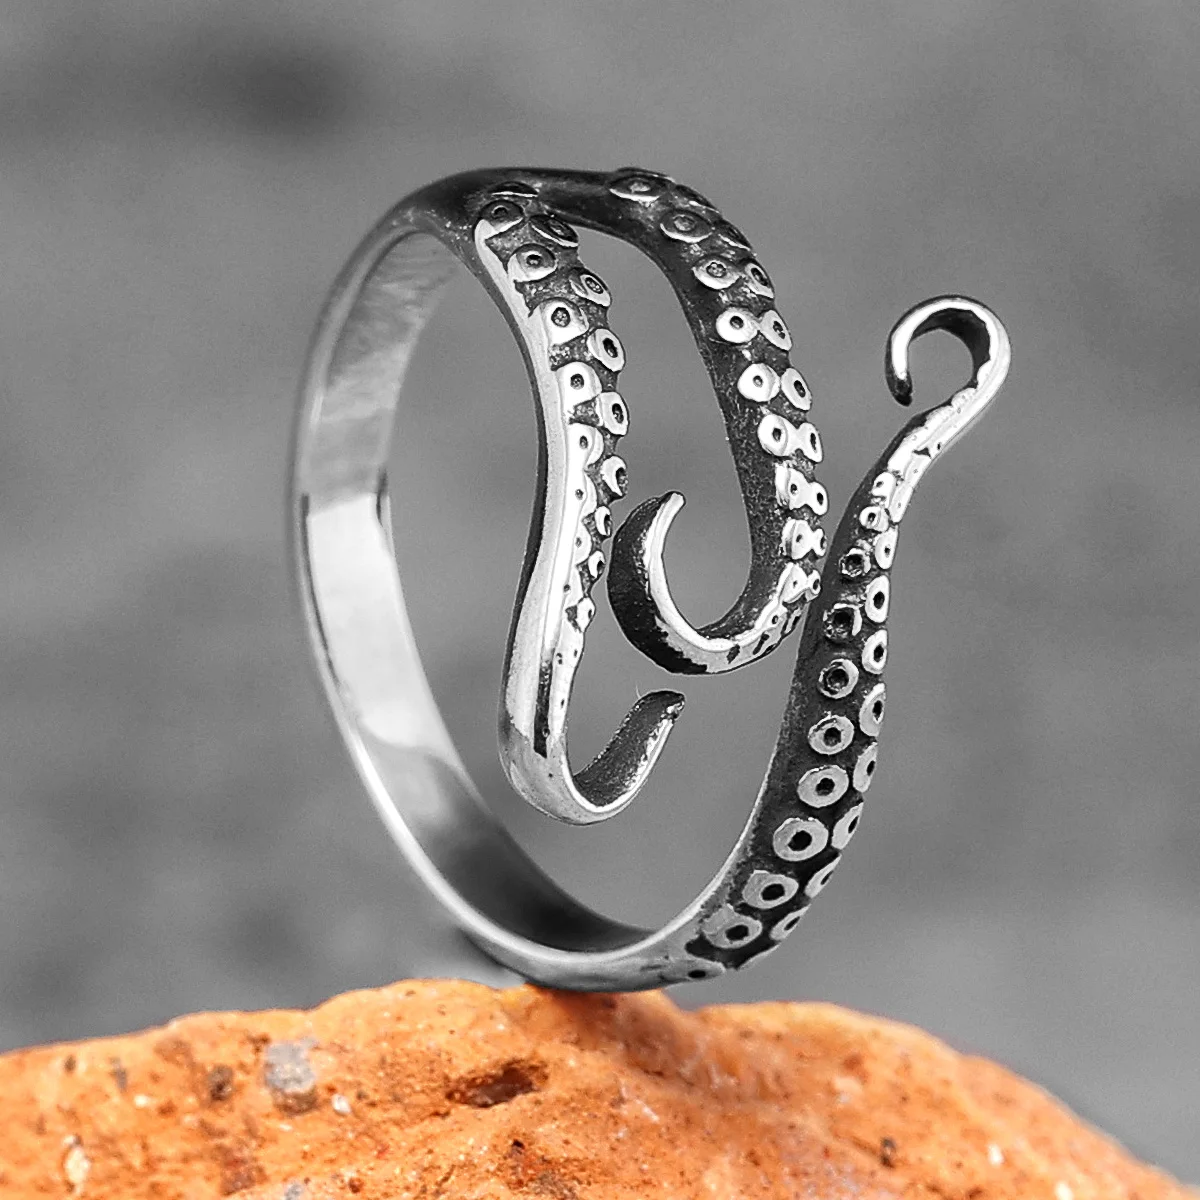 

Octopus Tentacles Stainless Steel Mens Womens Rings Punk Trendy Unique for Couple Male Biker Jewelry Creativity Gift Wholesale